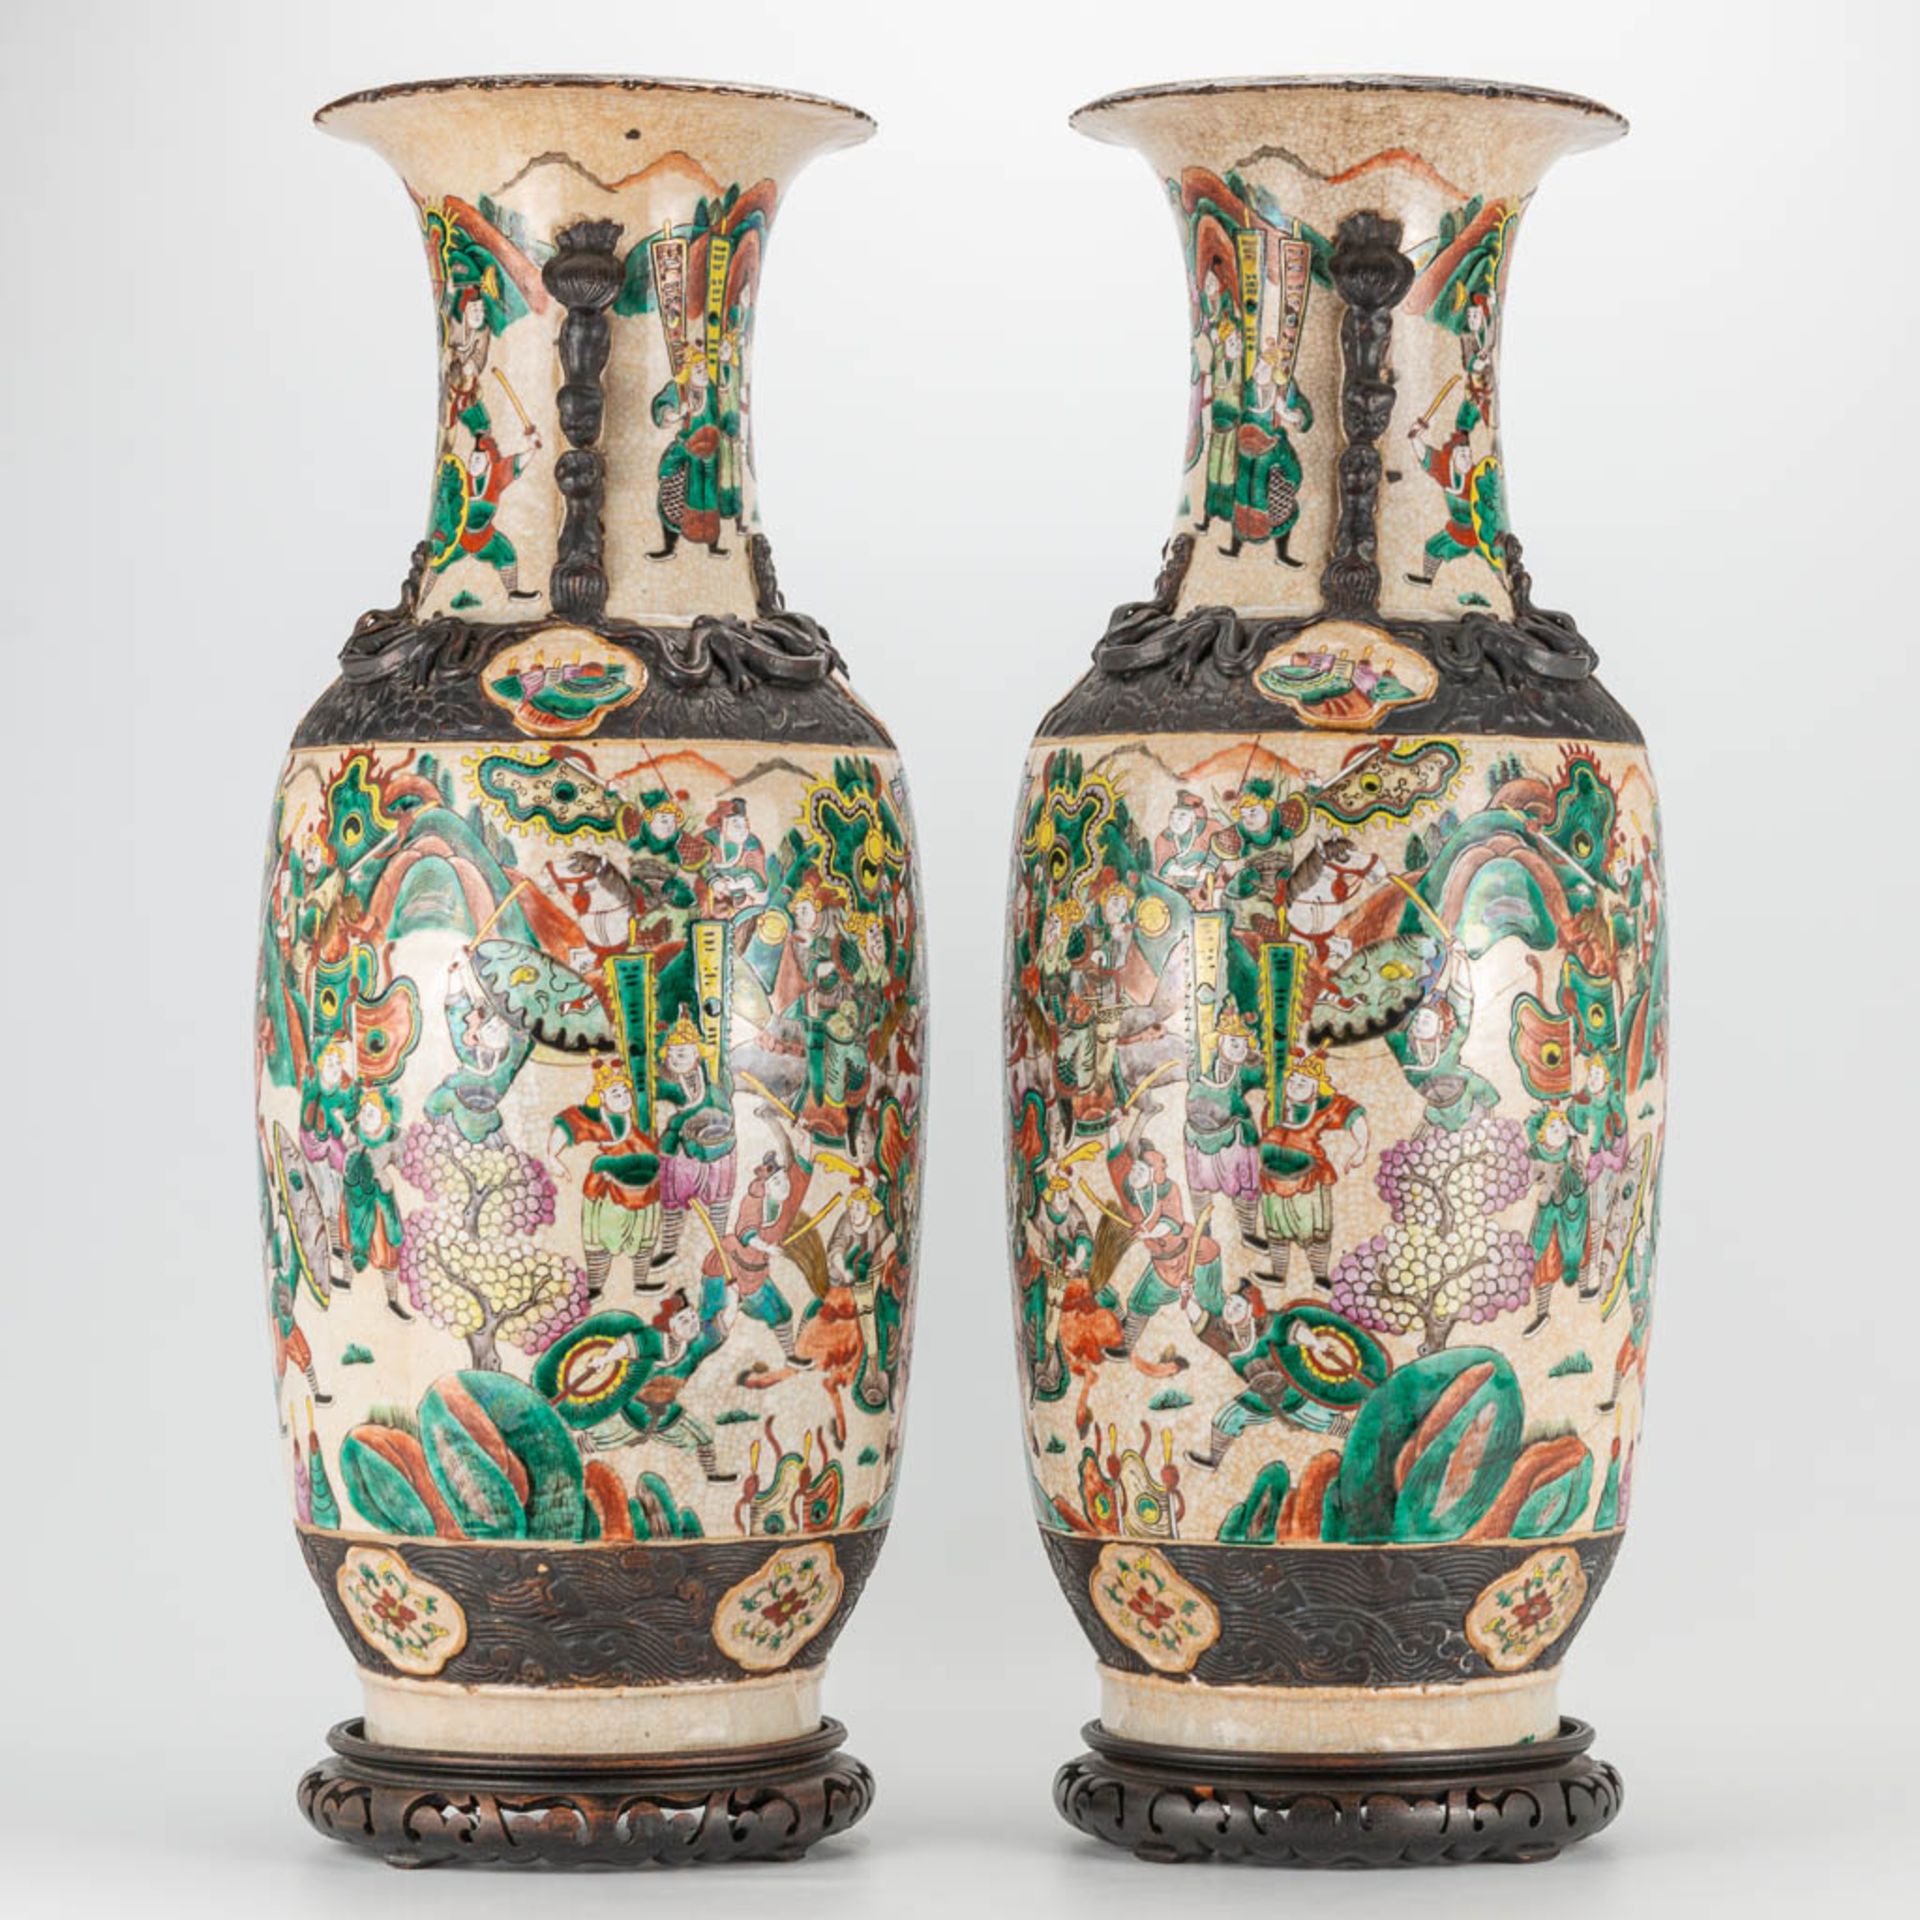 A pair of large Nanking Chinese vases with decor of warriors. 19th/20th century. (62 x 24 cm) - Image 2 of 29